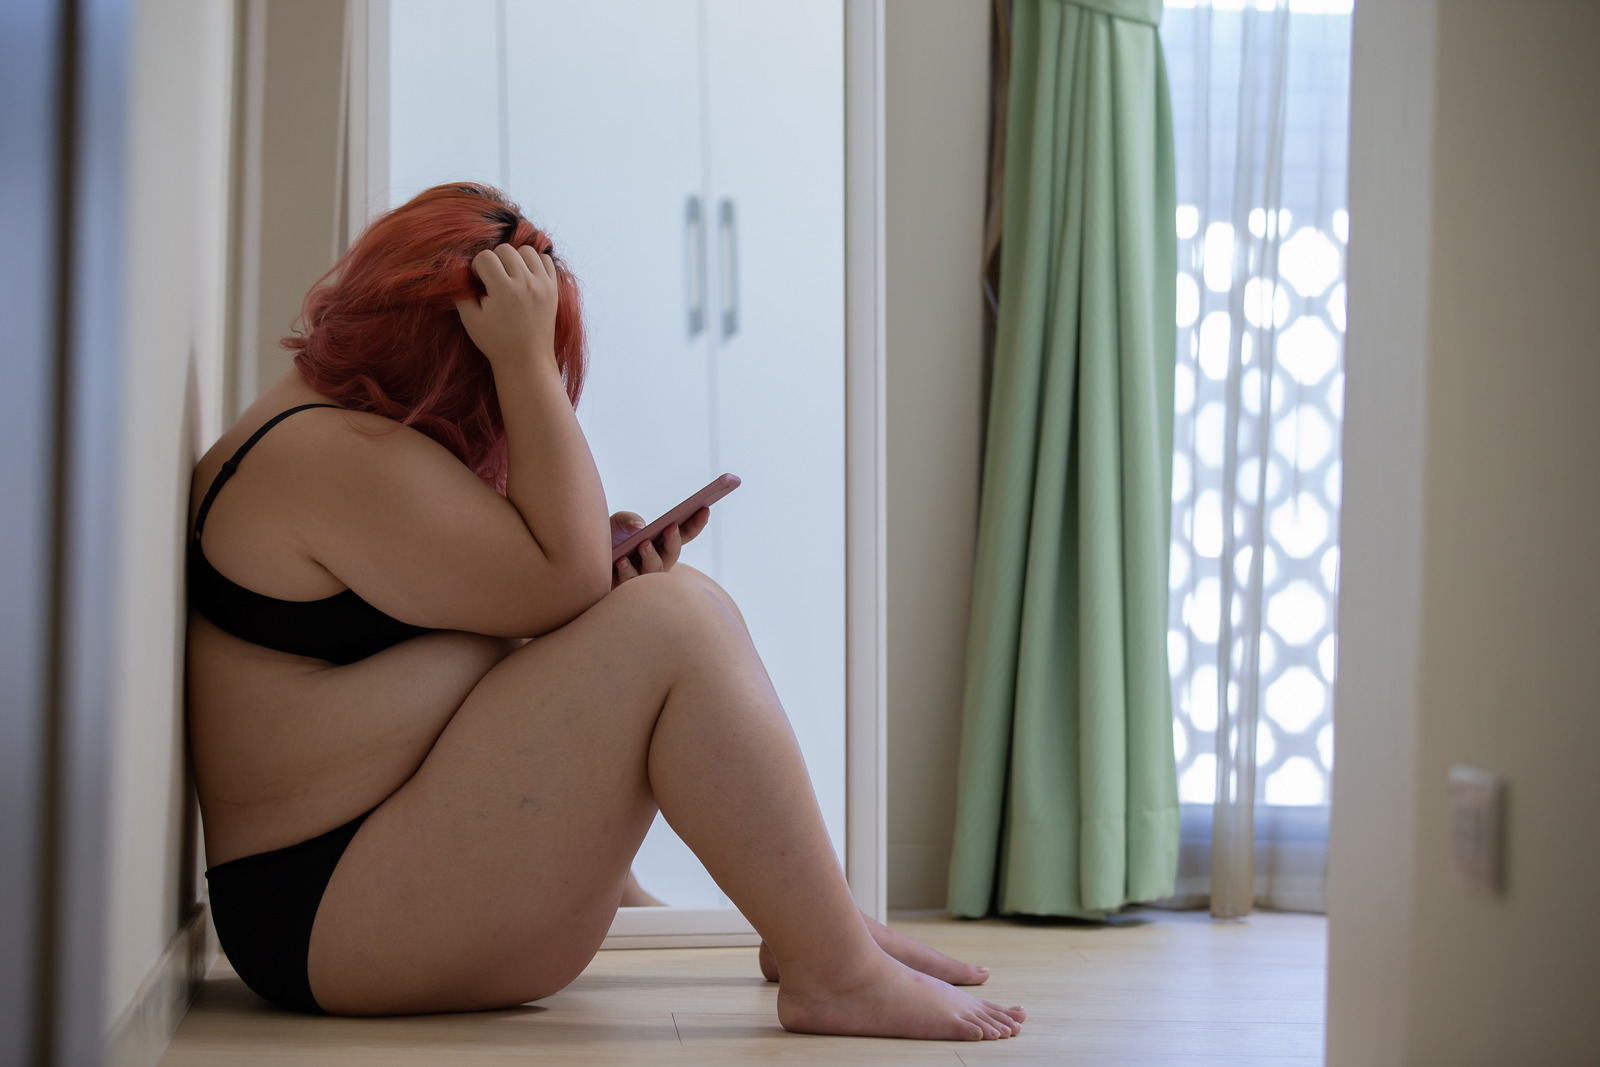 plus size woman looking at her phone in underwear STOCK PHOTO